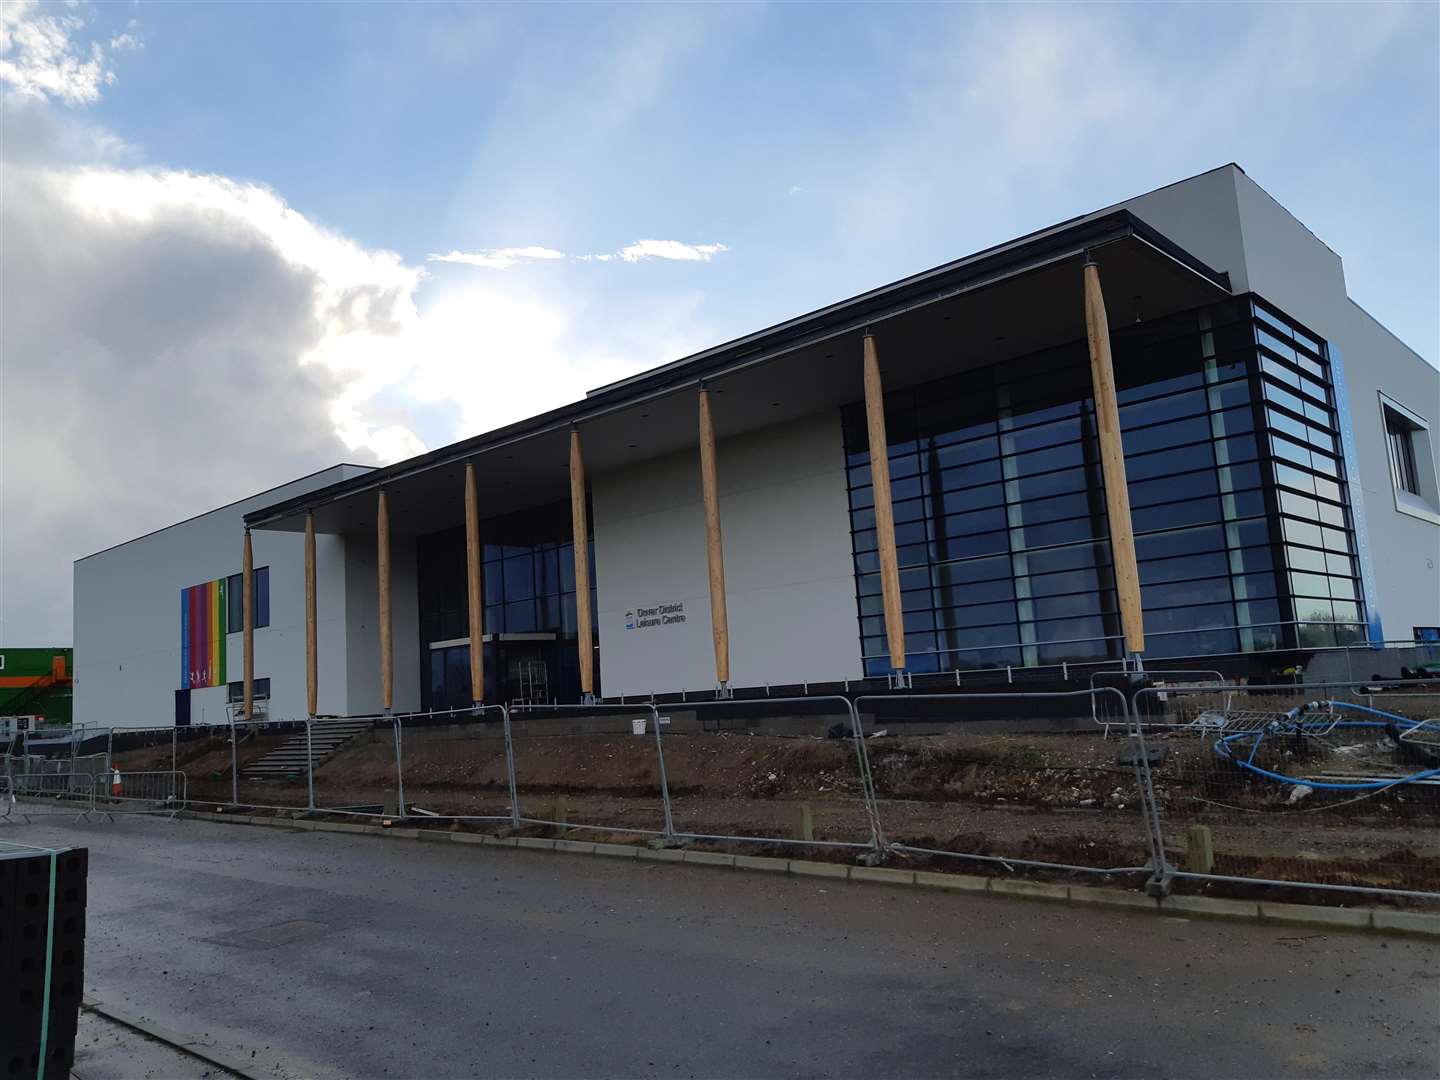 The new Dover District Leisure Centre